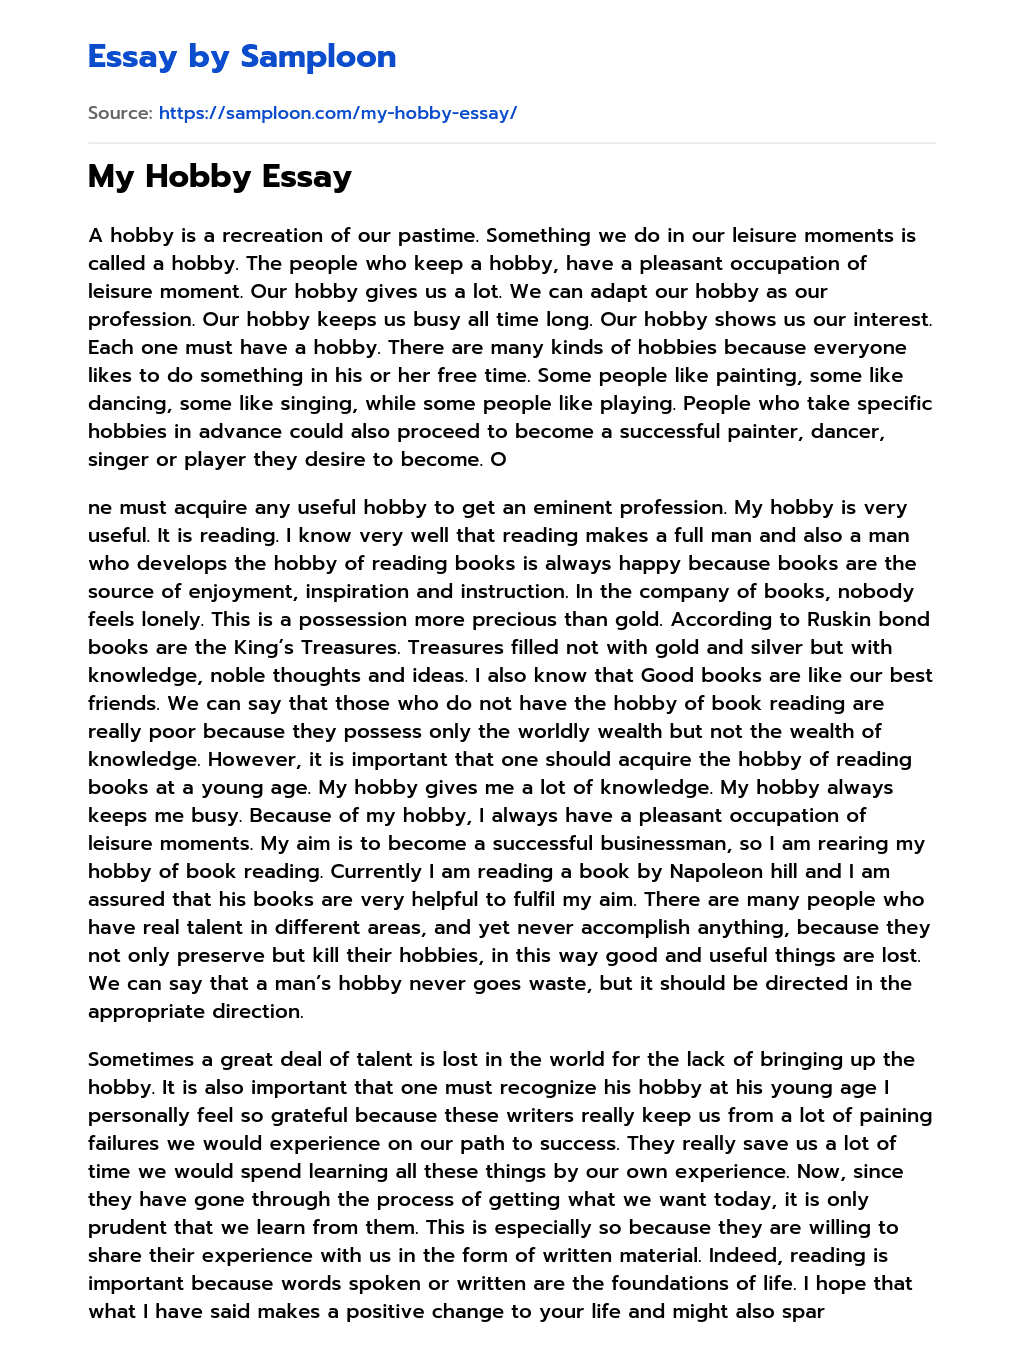 opinion essay about hobby